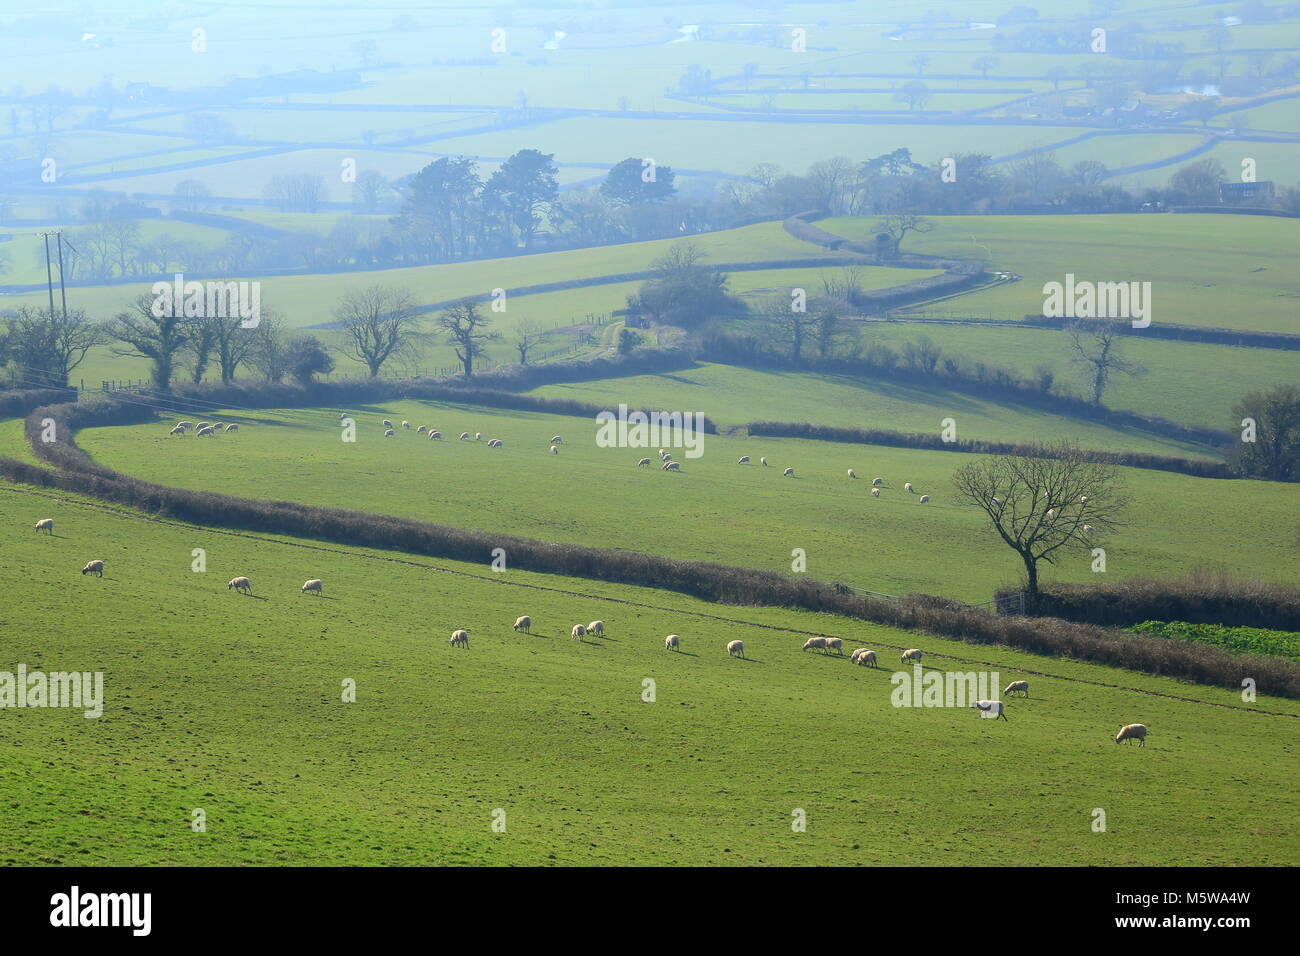 Flock of sheep graze on the farmland near Musbury Hill in East Devon Area of Outstanding Natural Beauty (AONB) Stock Photo